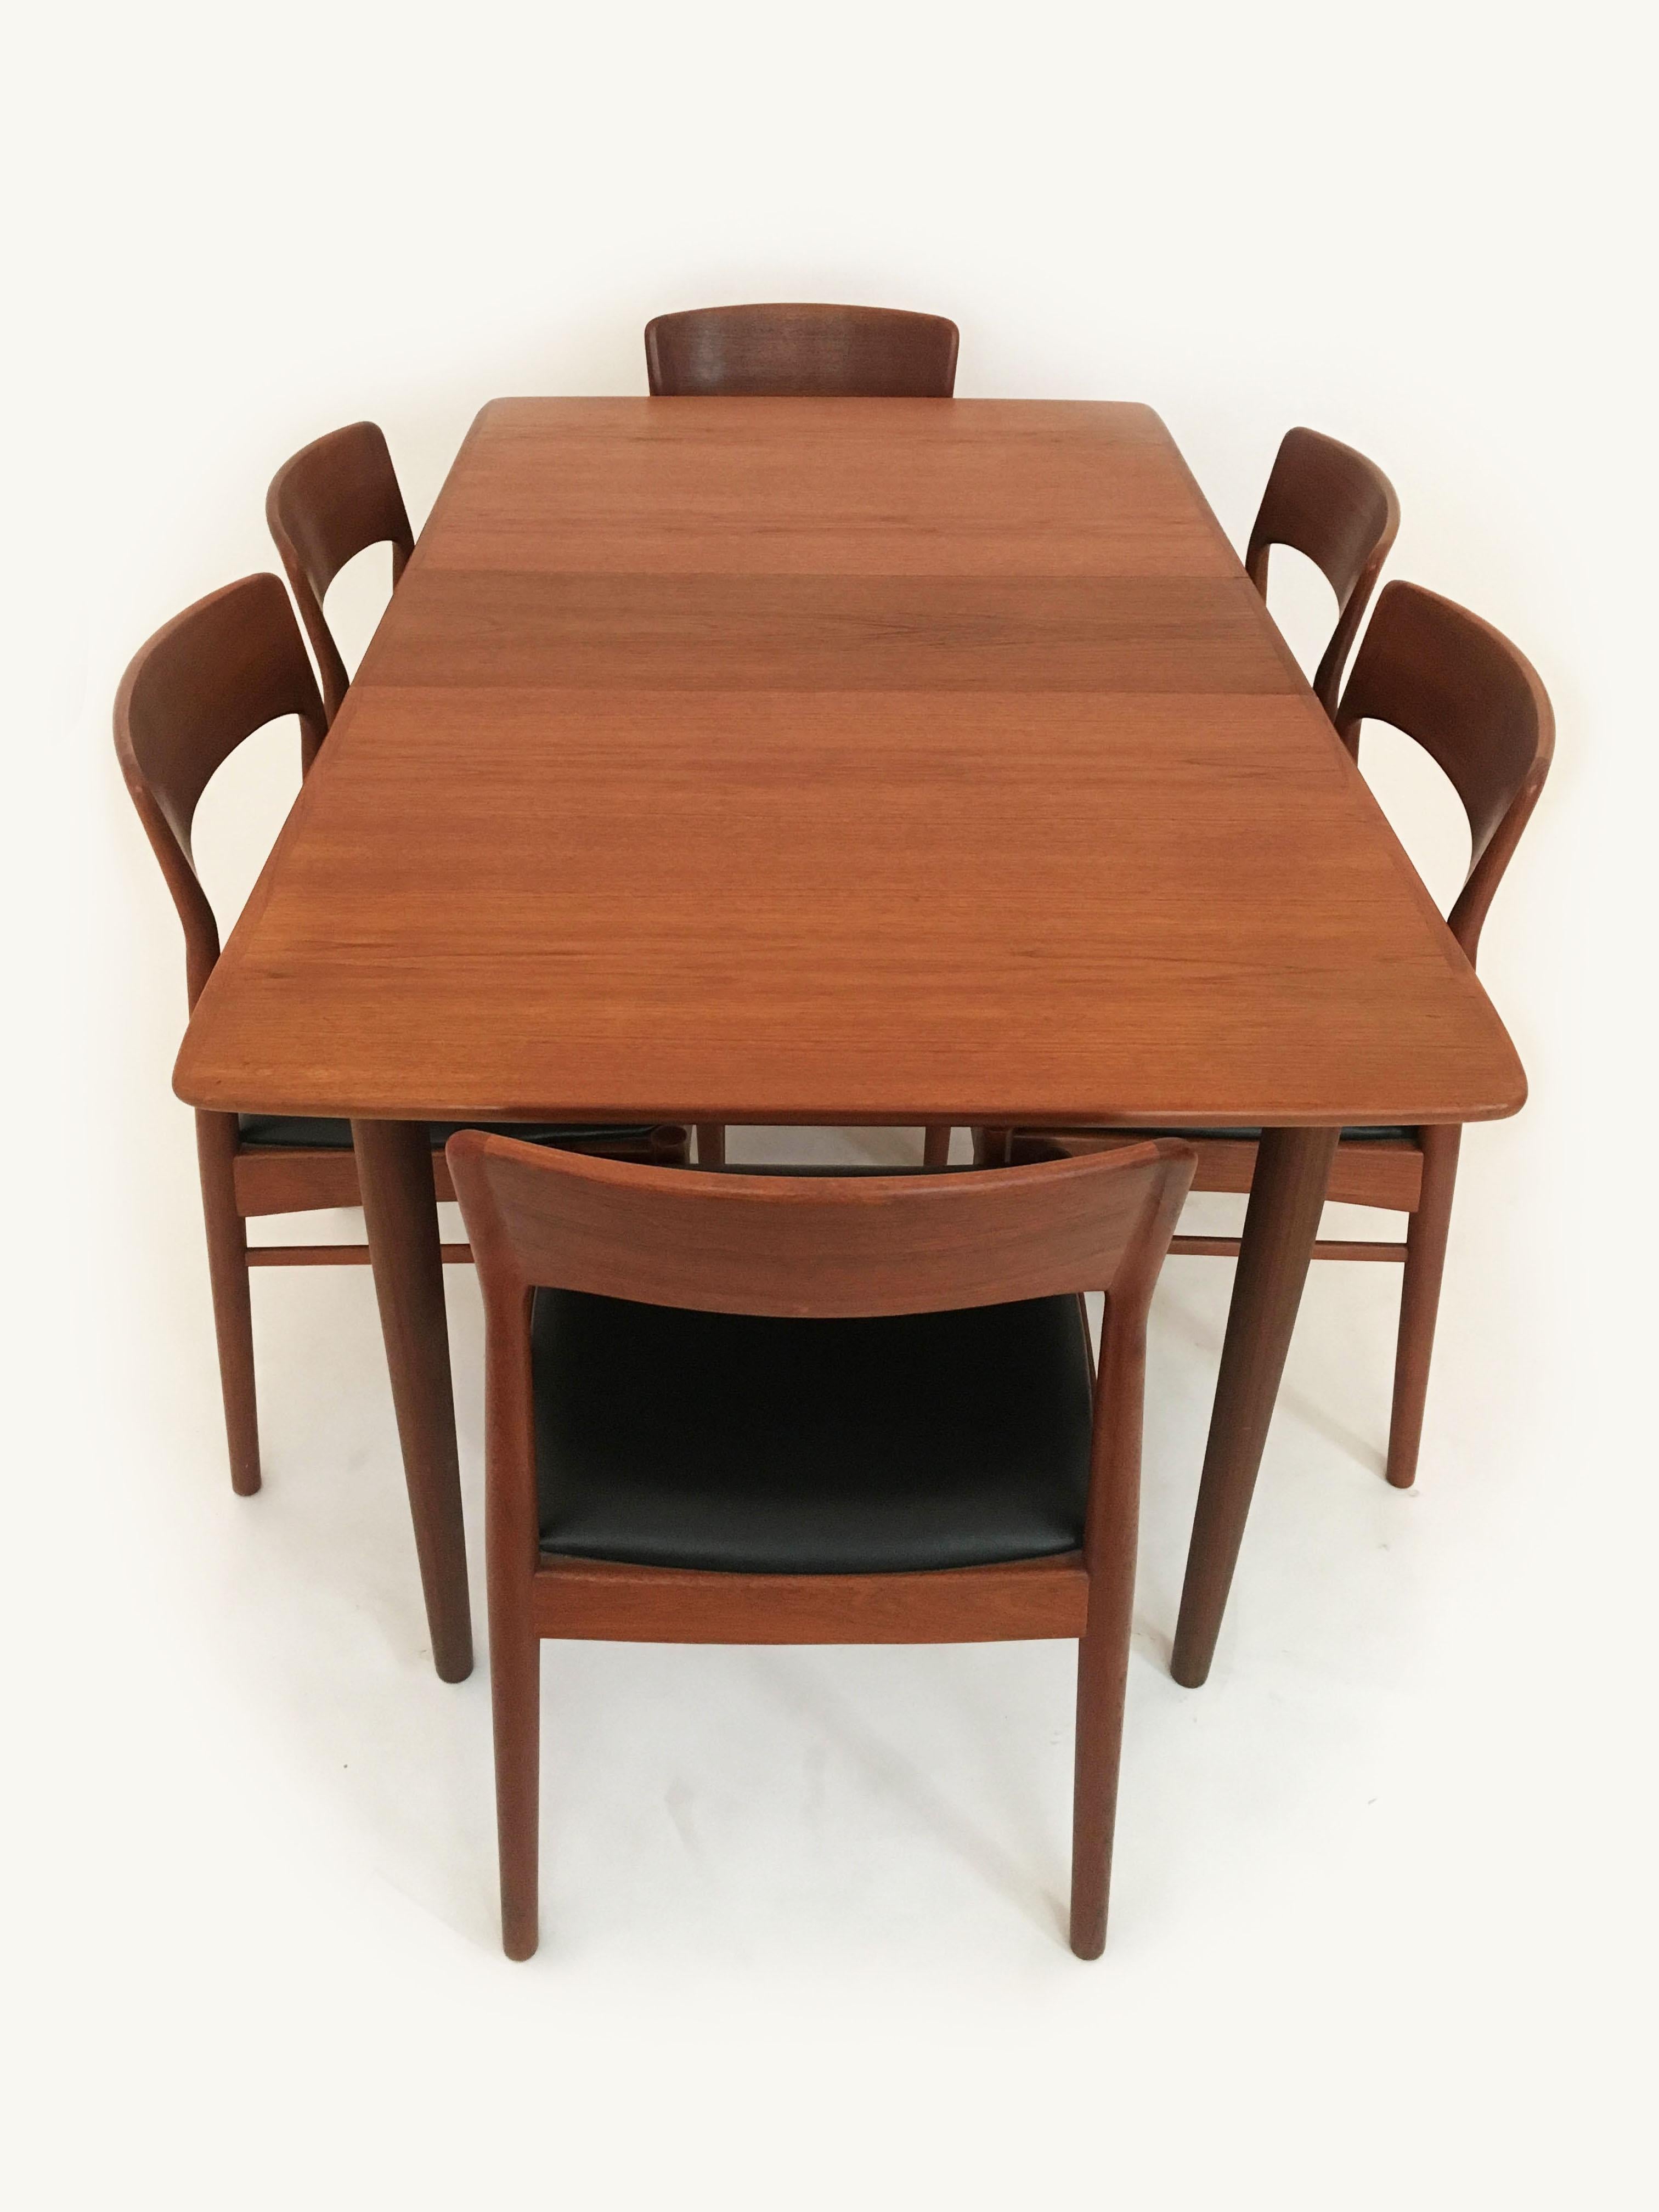 ny lovely Scandinavian dining table set by Gustav Bahus and Kai Kristiansen. The table and the six chairs in teak both have a wonderful shape with slightly curved edges - a very nice combinatiobeyinmbnByhn sure to inspire any n room with it's modern